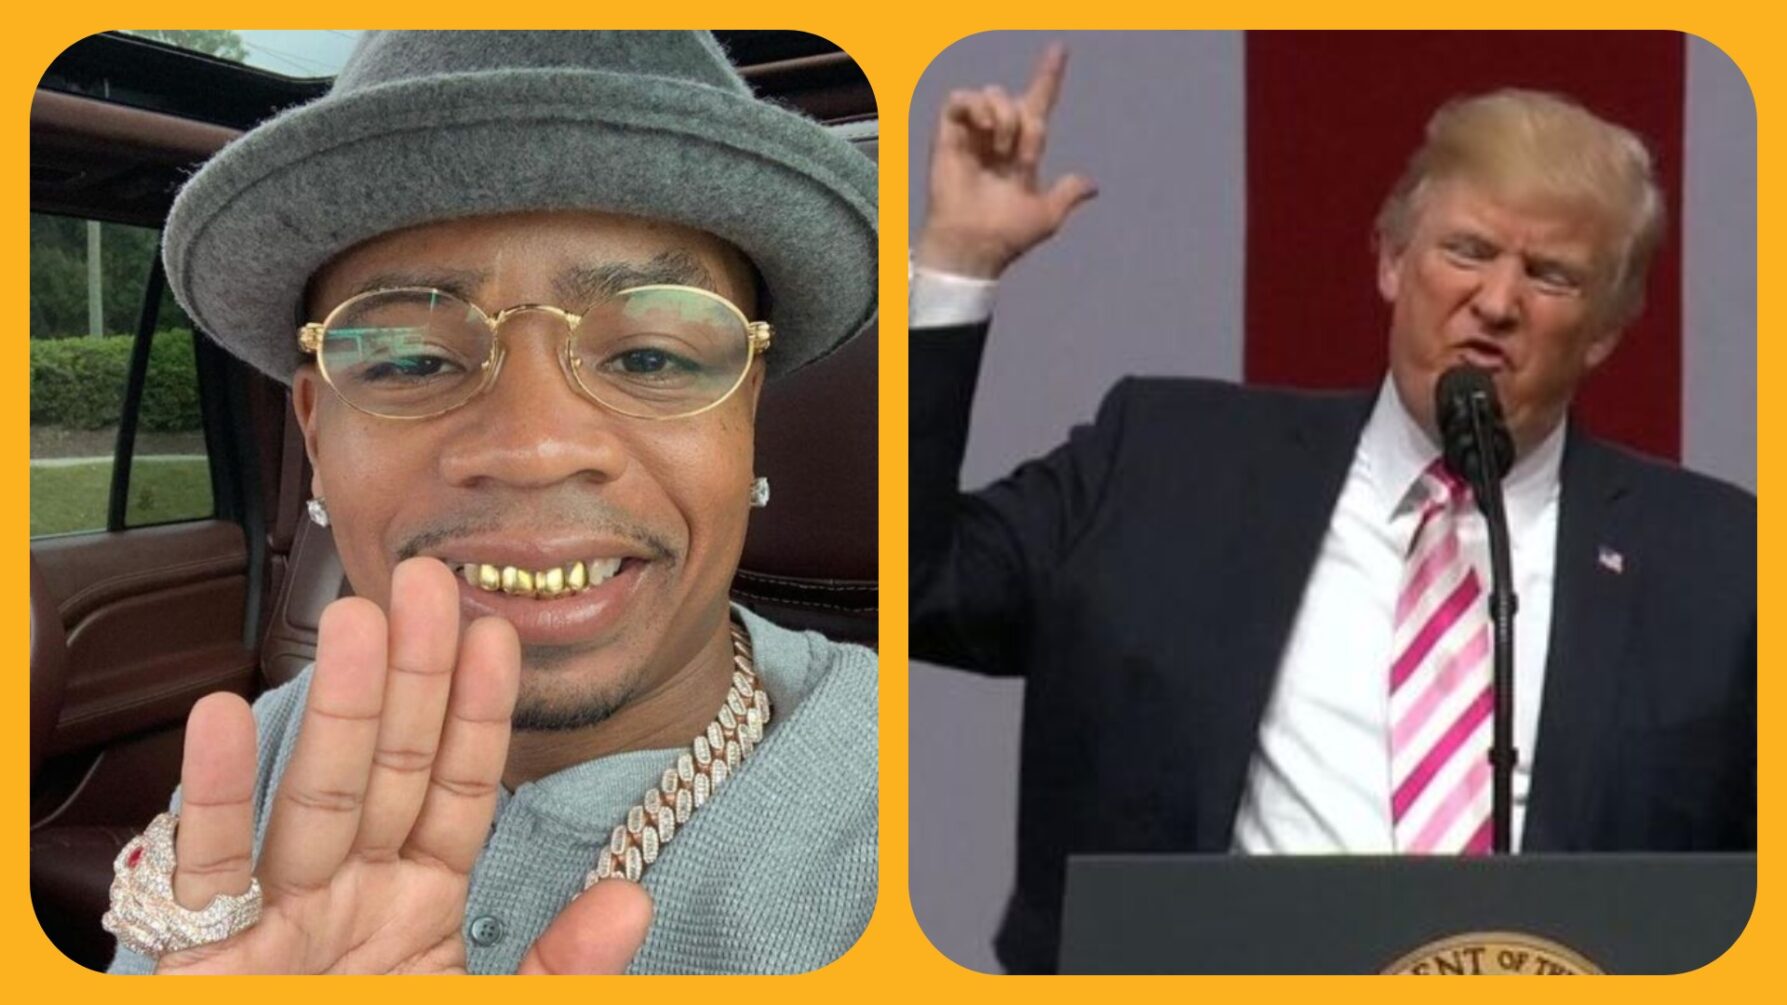 Plies Reacts To Donald Trump Saying Black People Like Him For His Crimes